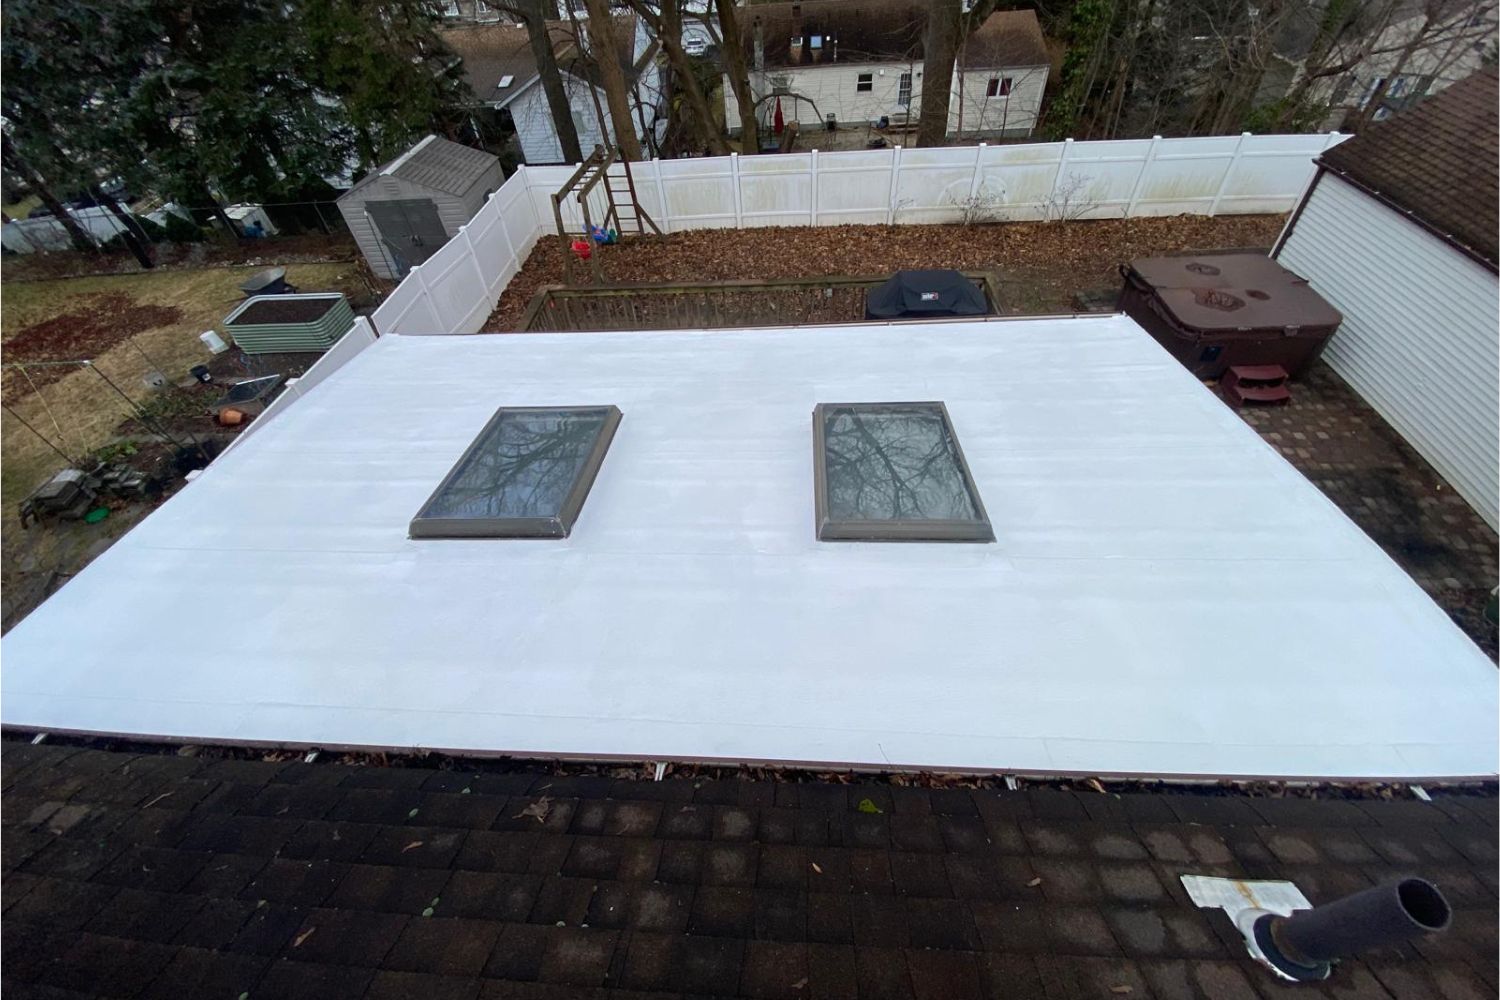 New Flat Roof Installation with Silicone Roof in Paramus NJ Project Shot 1